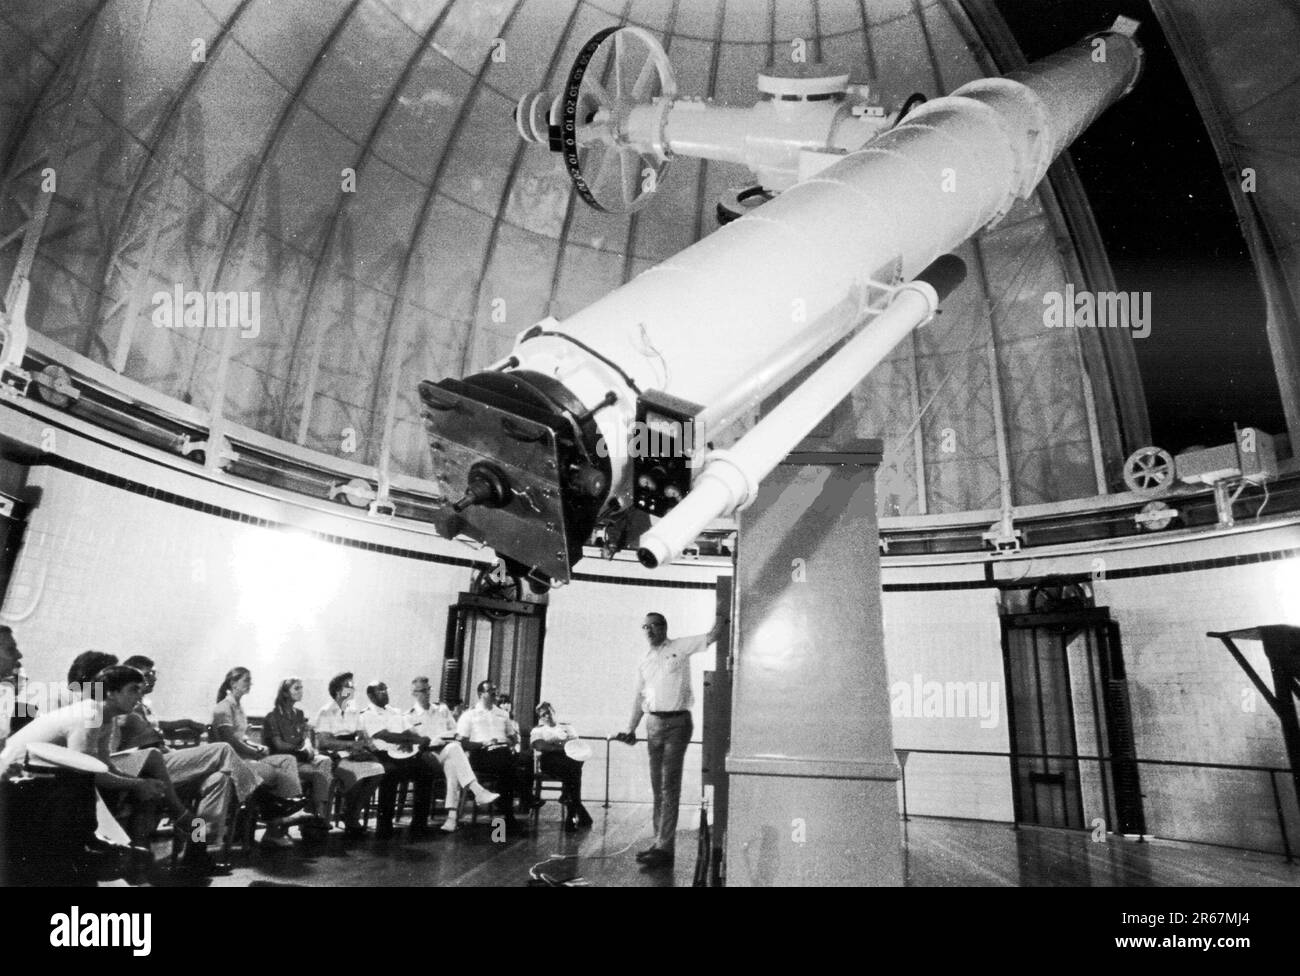 The telescope used to discover the Martian moons, two moons of Mars, Deimos and Phobos, in 1877. United States Naval Observatory Stock Photo